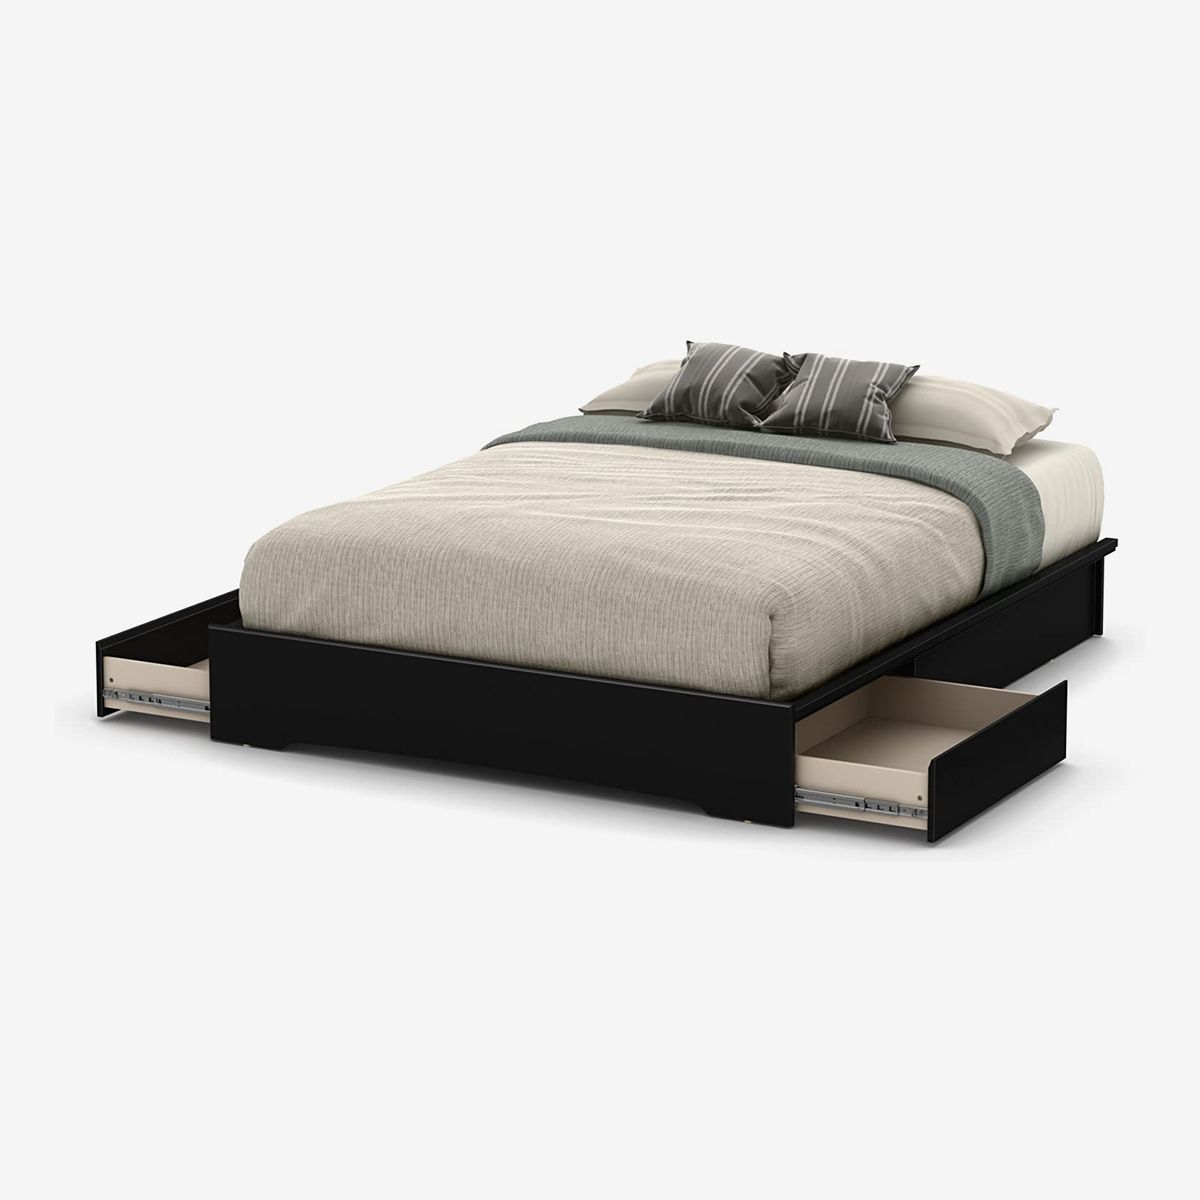 Modern Platform Beds With Storage, Full Bed Frame With Storage One Side